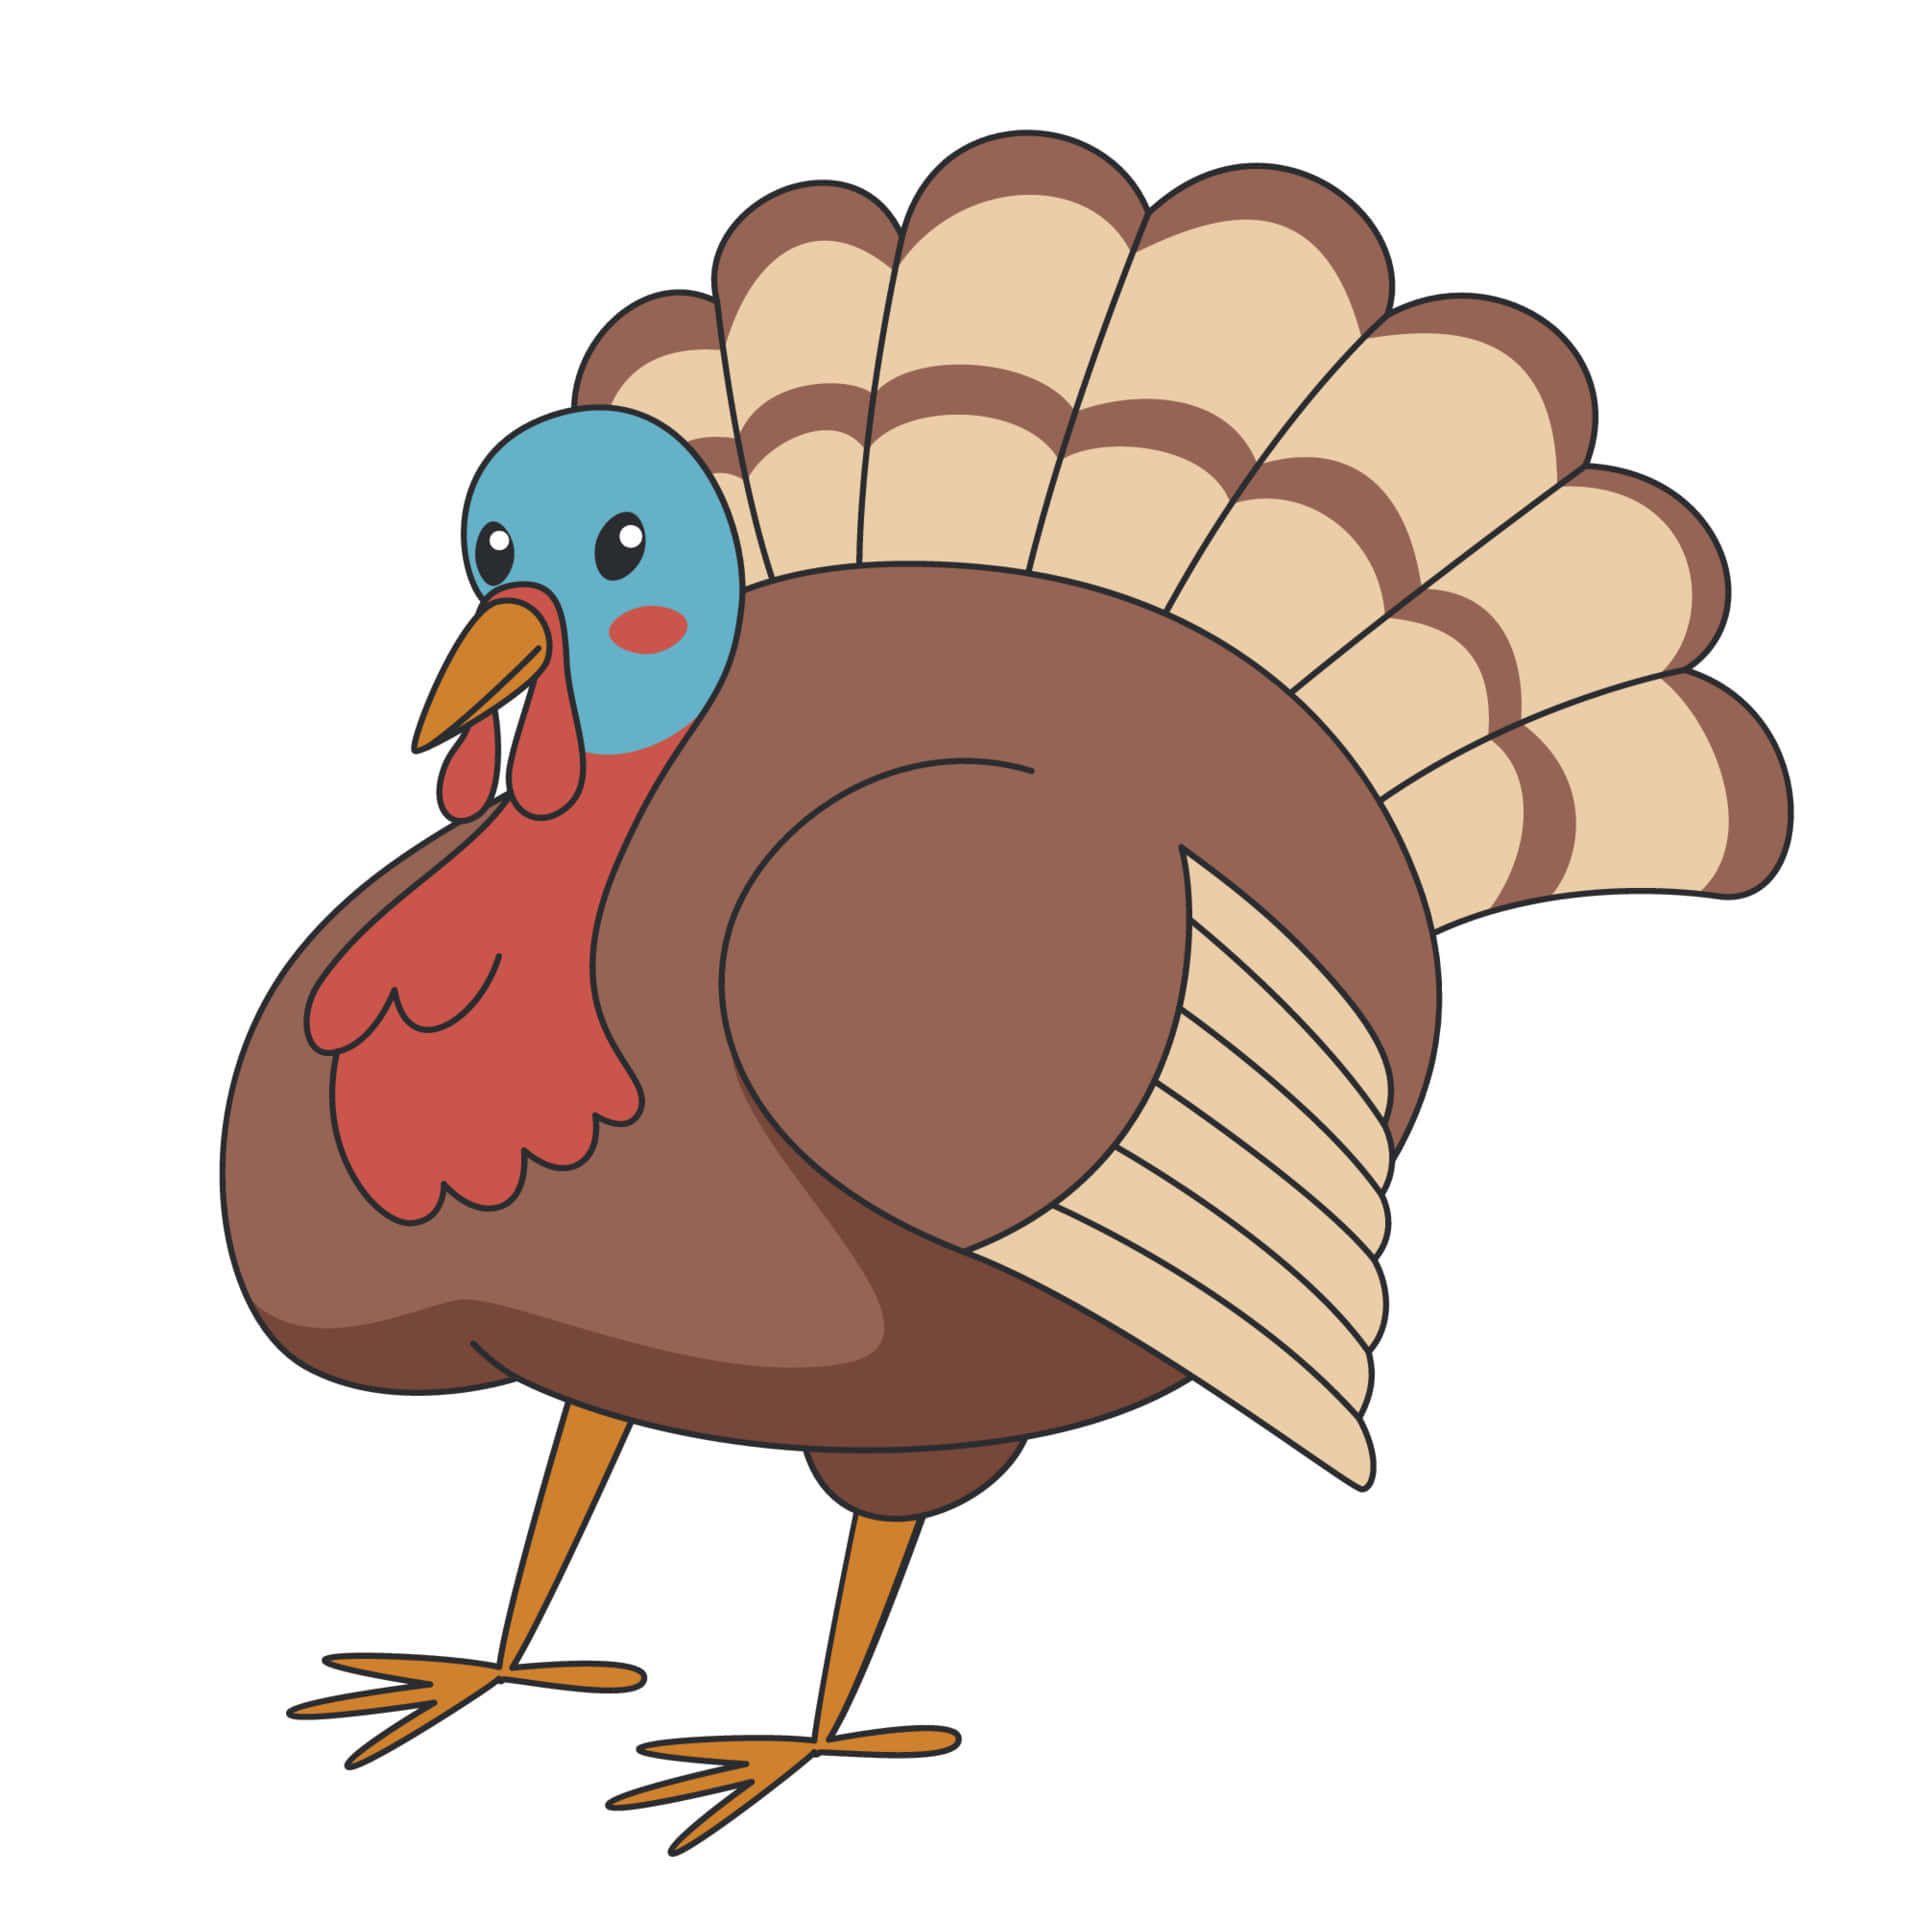 Cute Turkey Smiling Illustration Picture